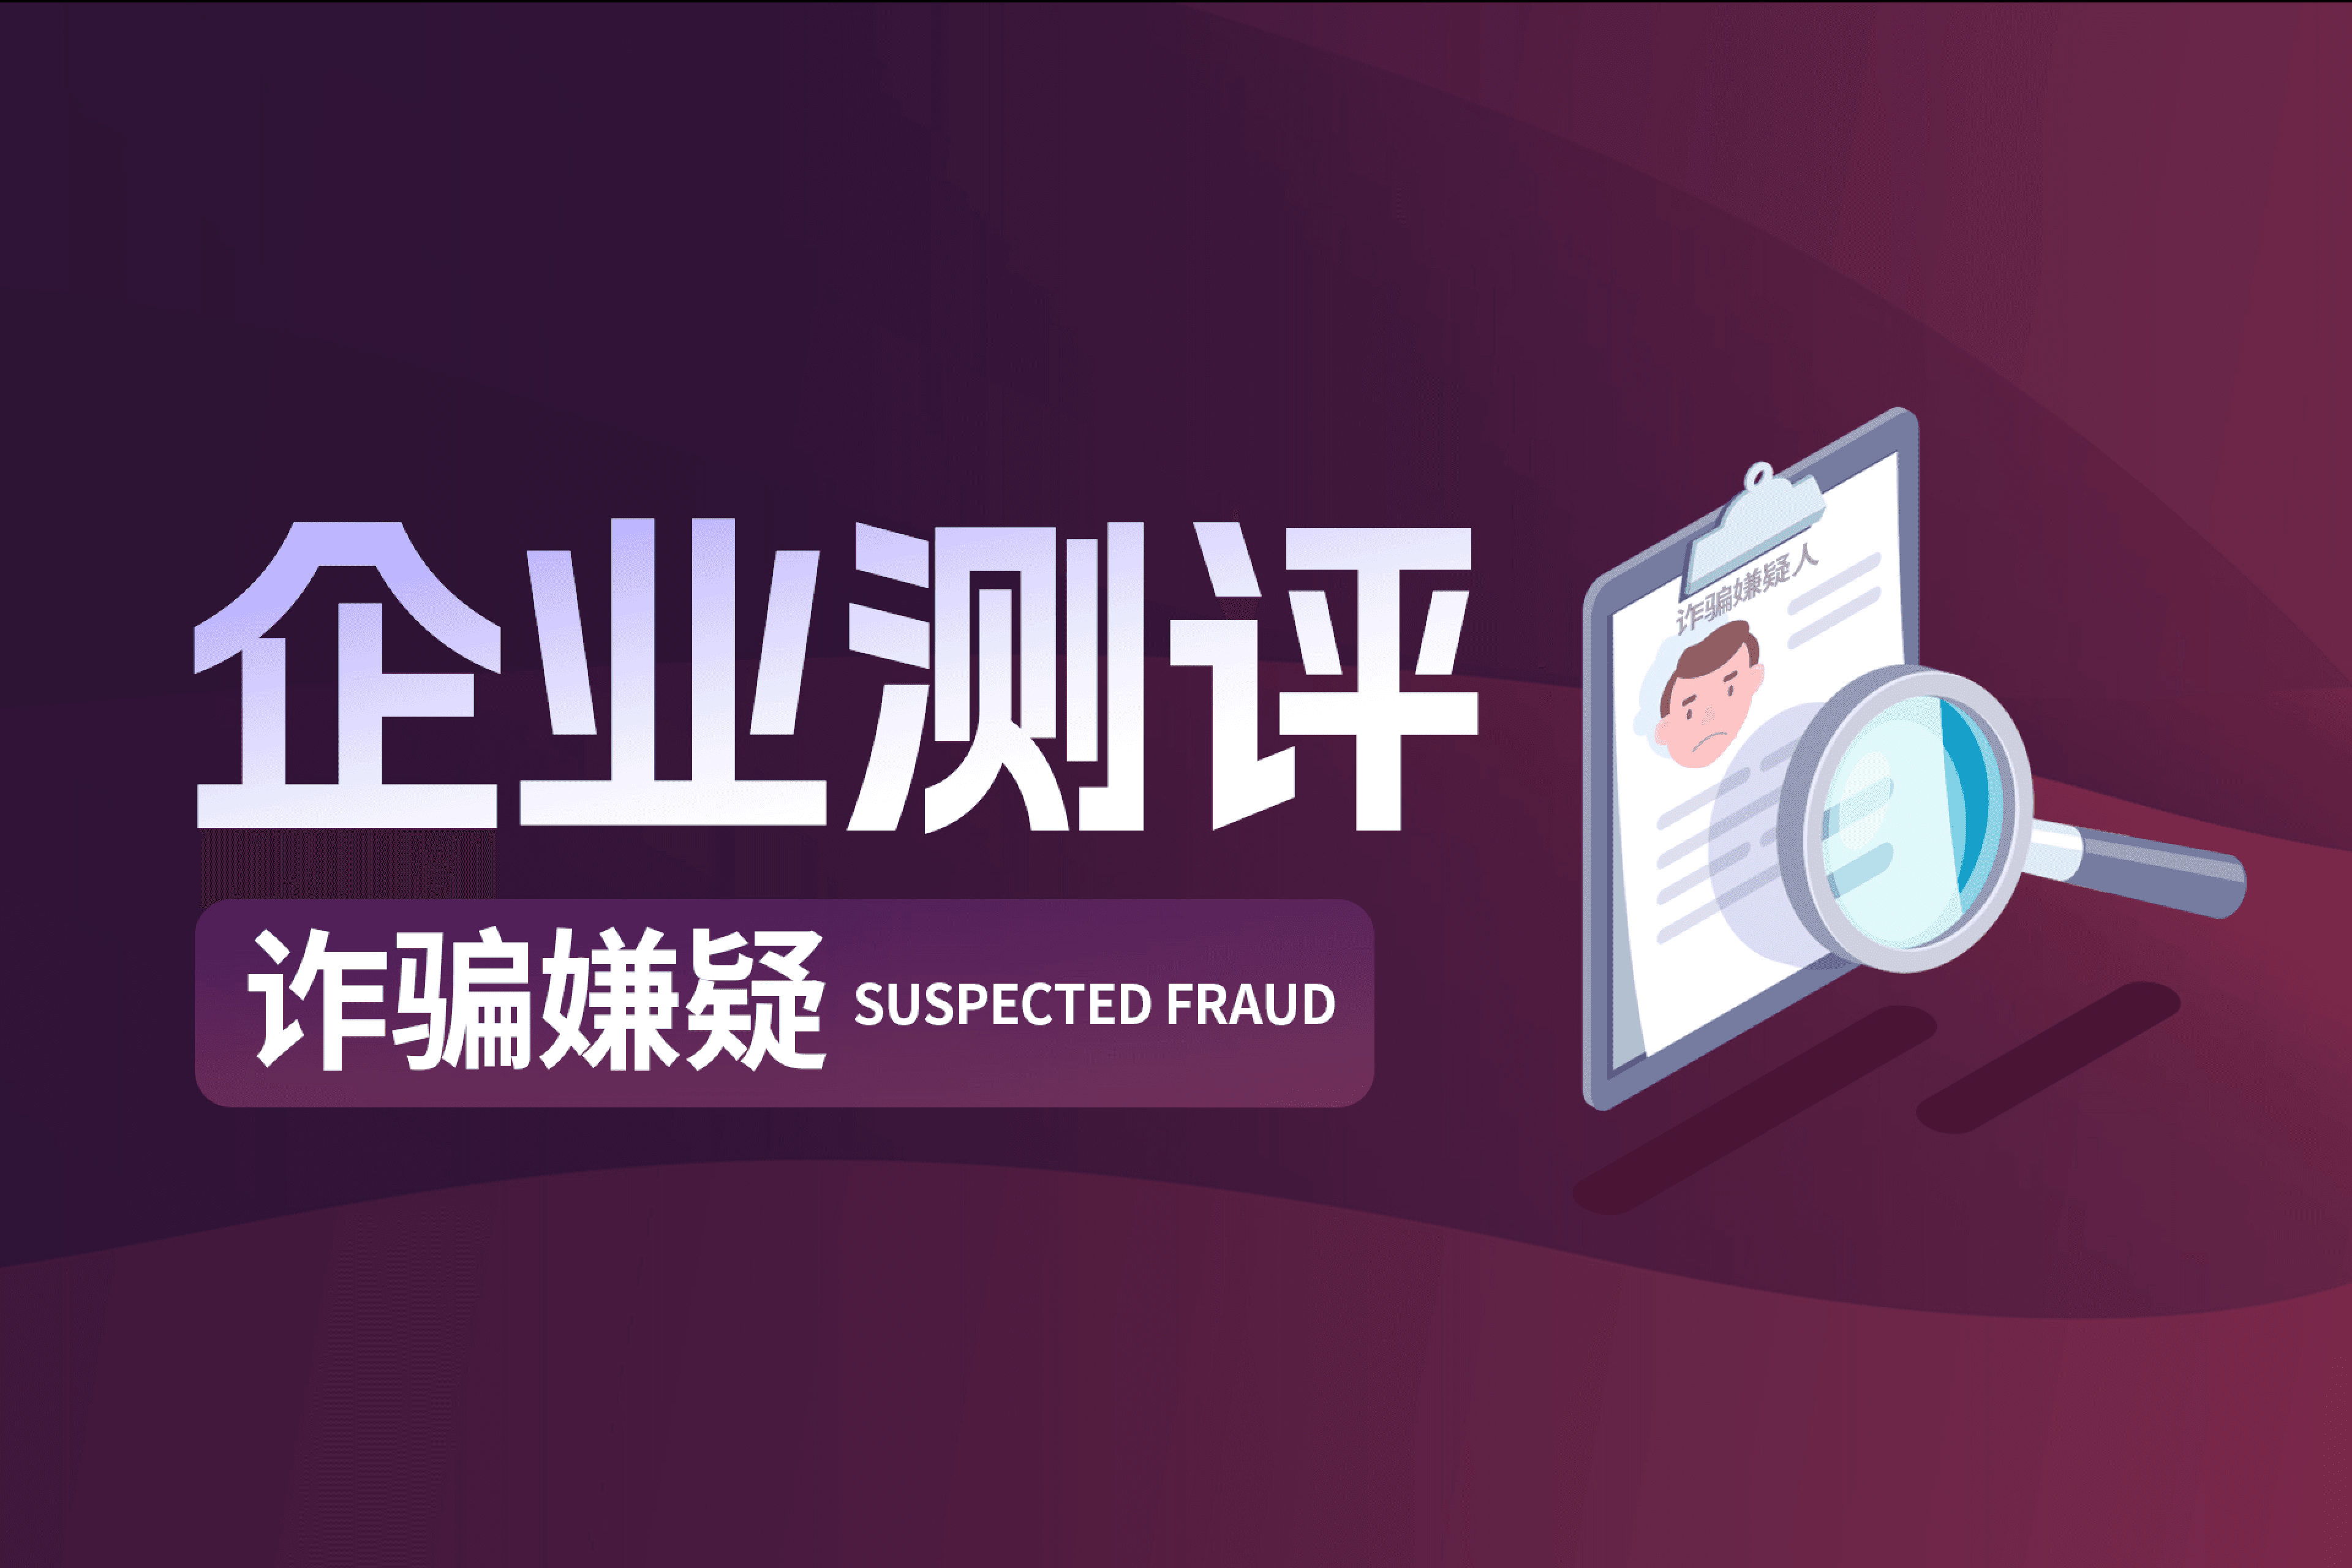 X METAVERSE PRO Review: High Risk (Suspected Fraud)